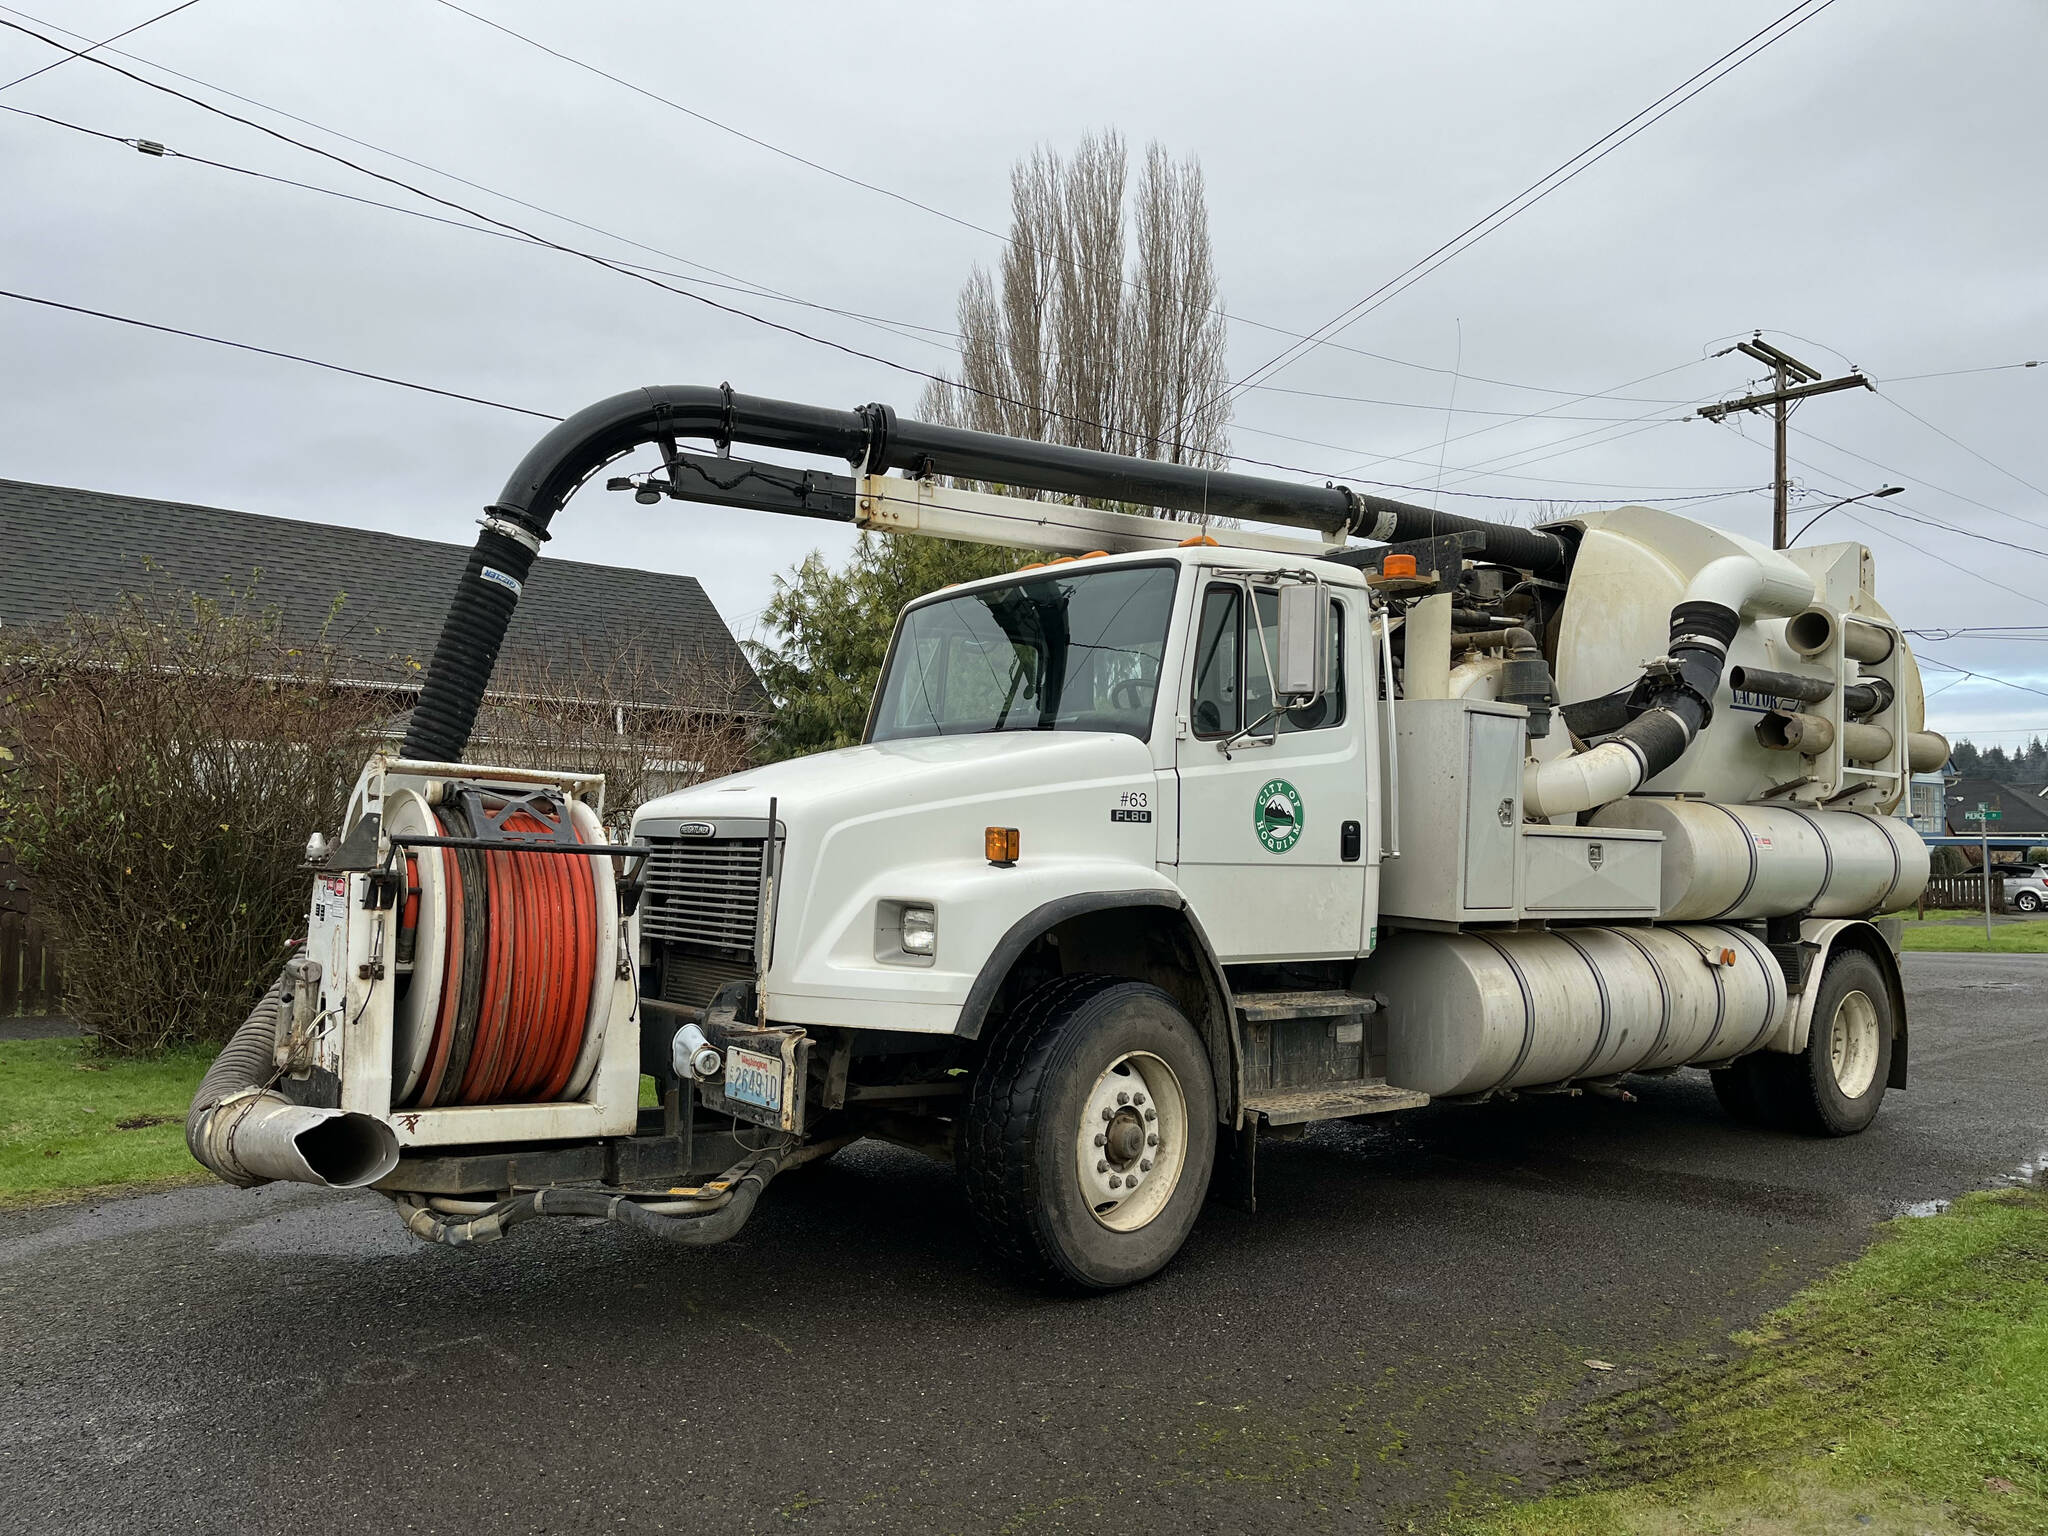 The City of Hoquiam's Vactor combo truck that Hoquiam's Public Works Department uses. (Matthew N. Wells | The Daily World)